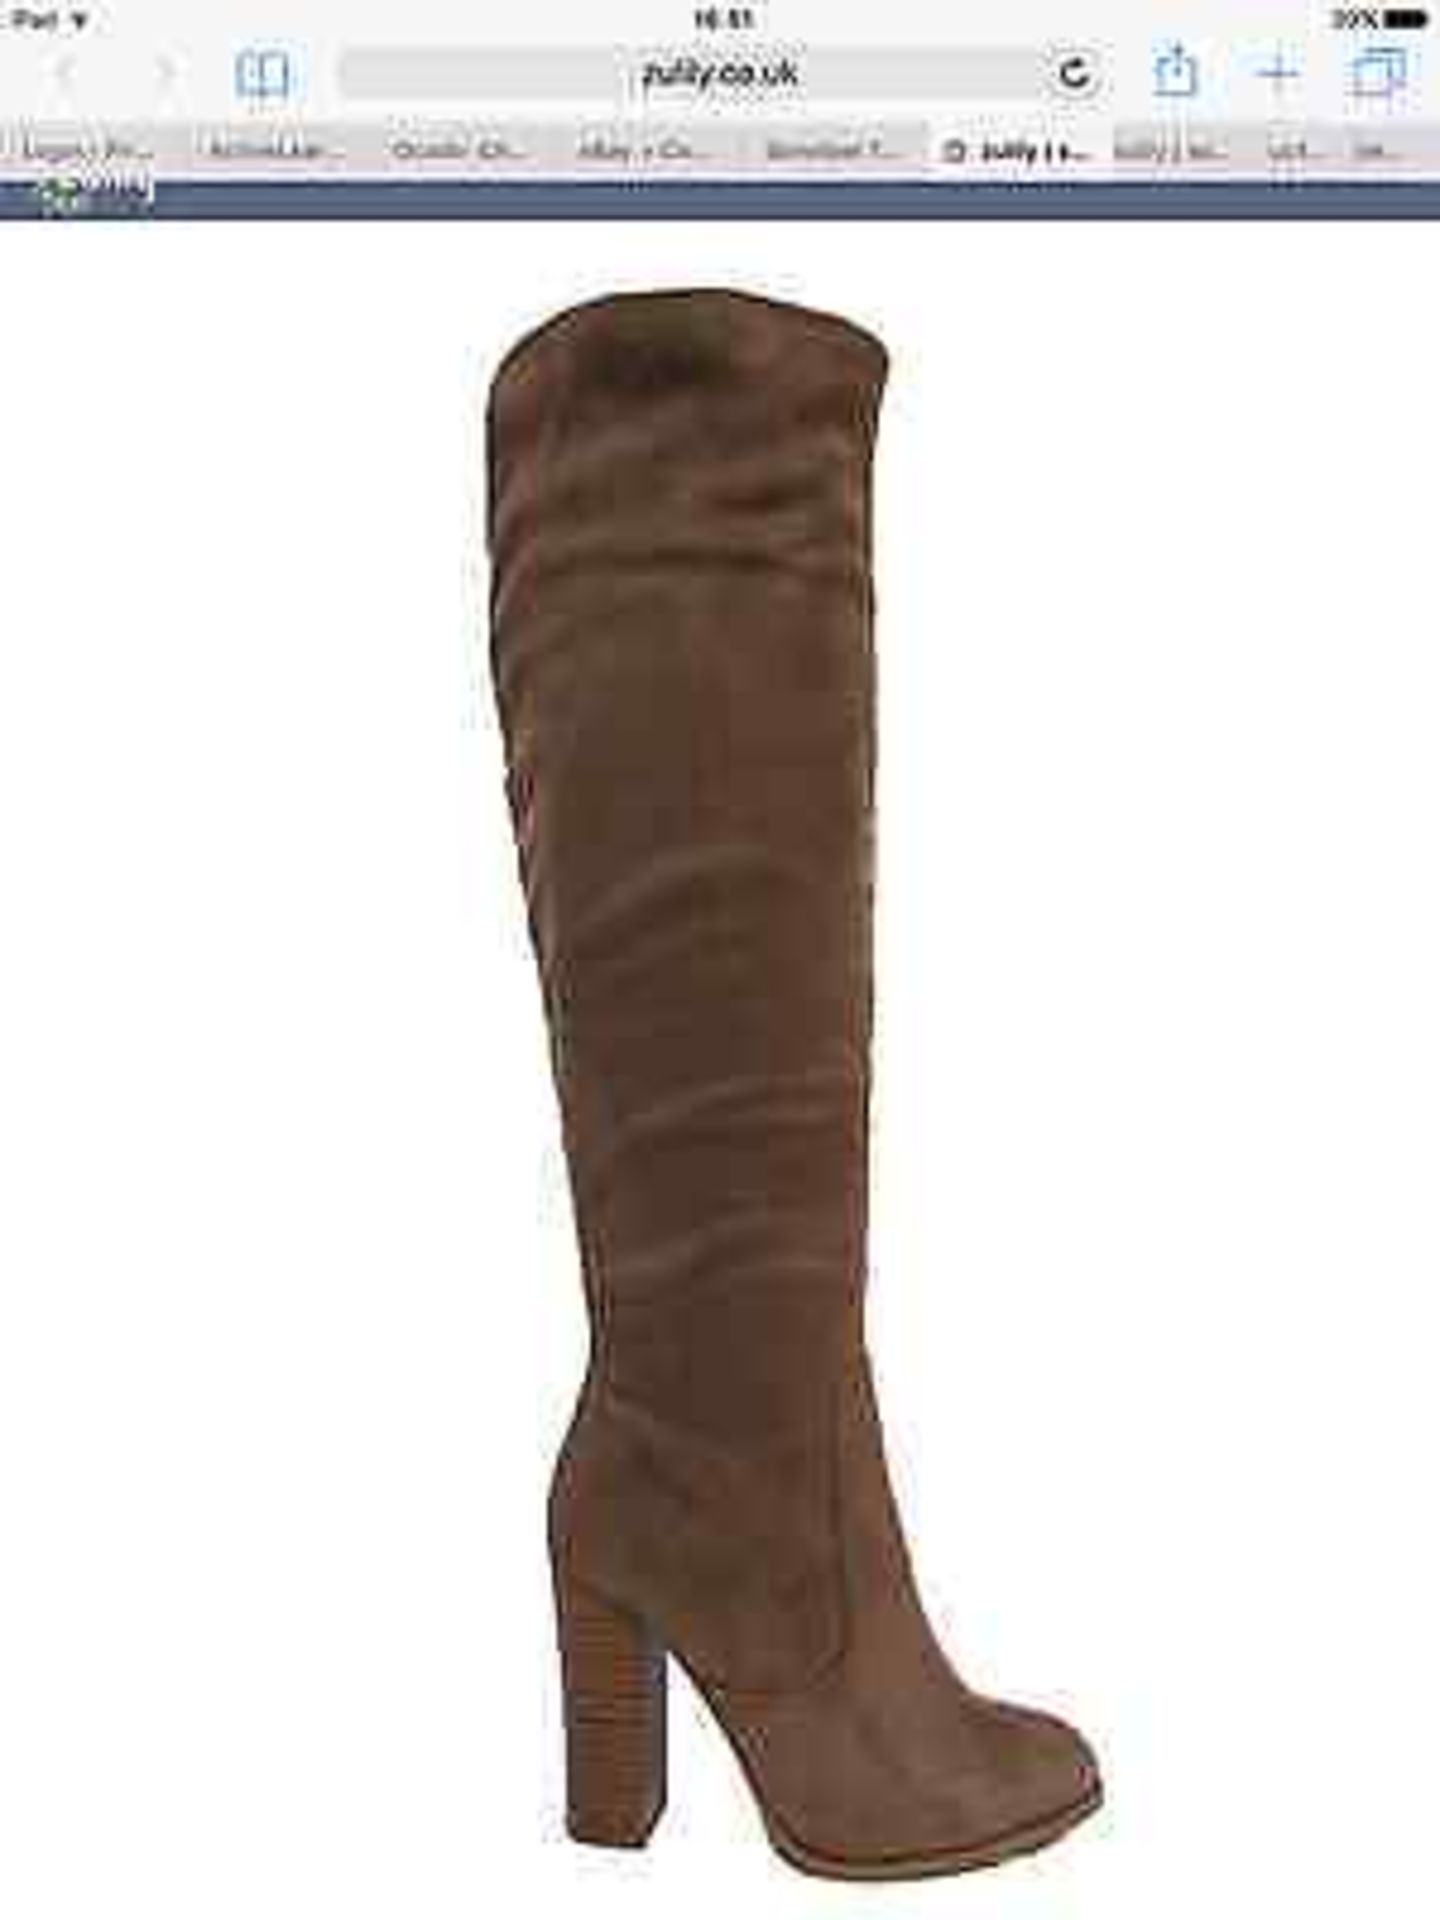 X2B Taupe Baina Boot, Size 6.5-7 (New with box) - Image 3 of 3